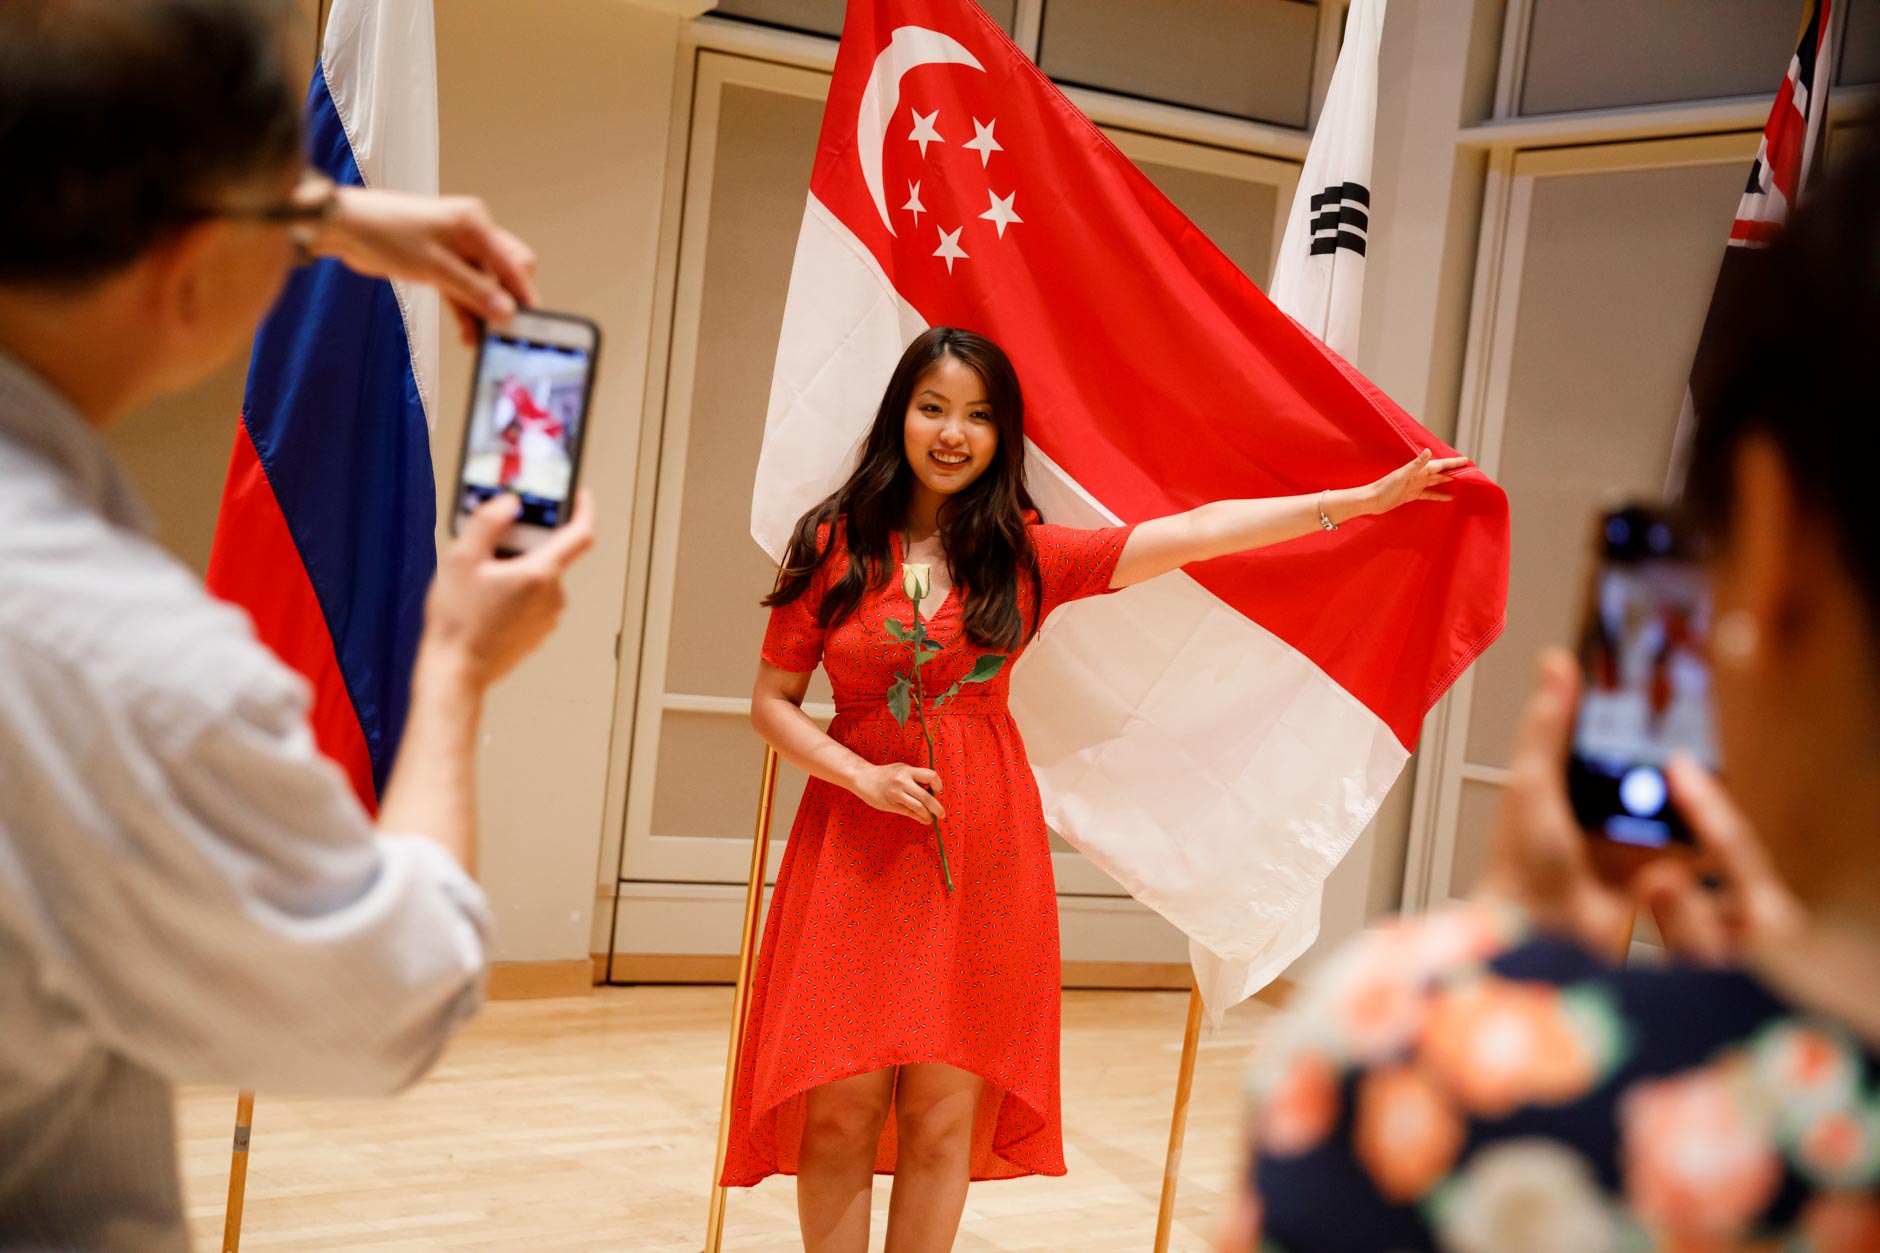 Nicolette Chin of Singapore poses with her country's flag after the opening ceremony of the 11th USA International Harp Competition at Indiana University in Bloomington, Indiana on Wednesday, July 3, 2019. (Photo by James Brosher)